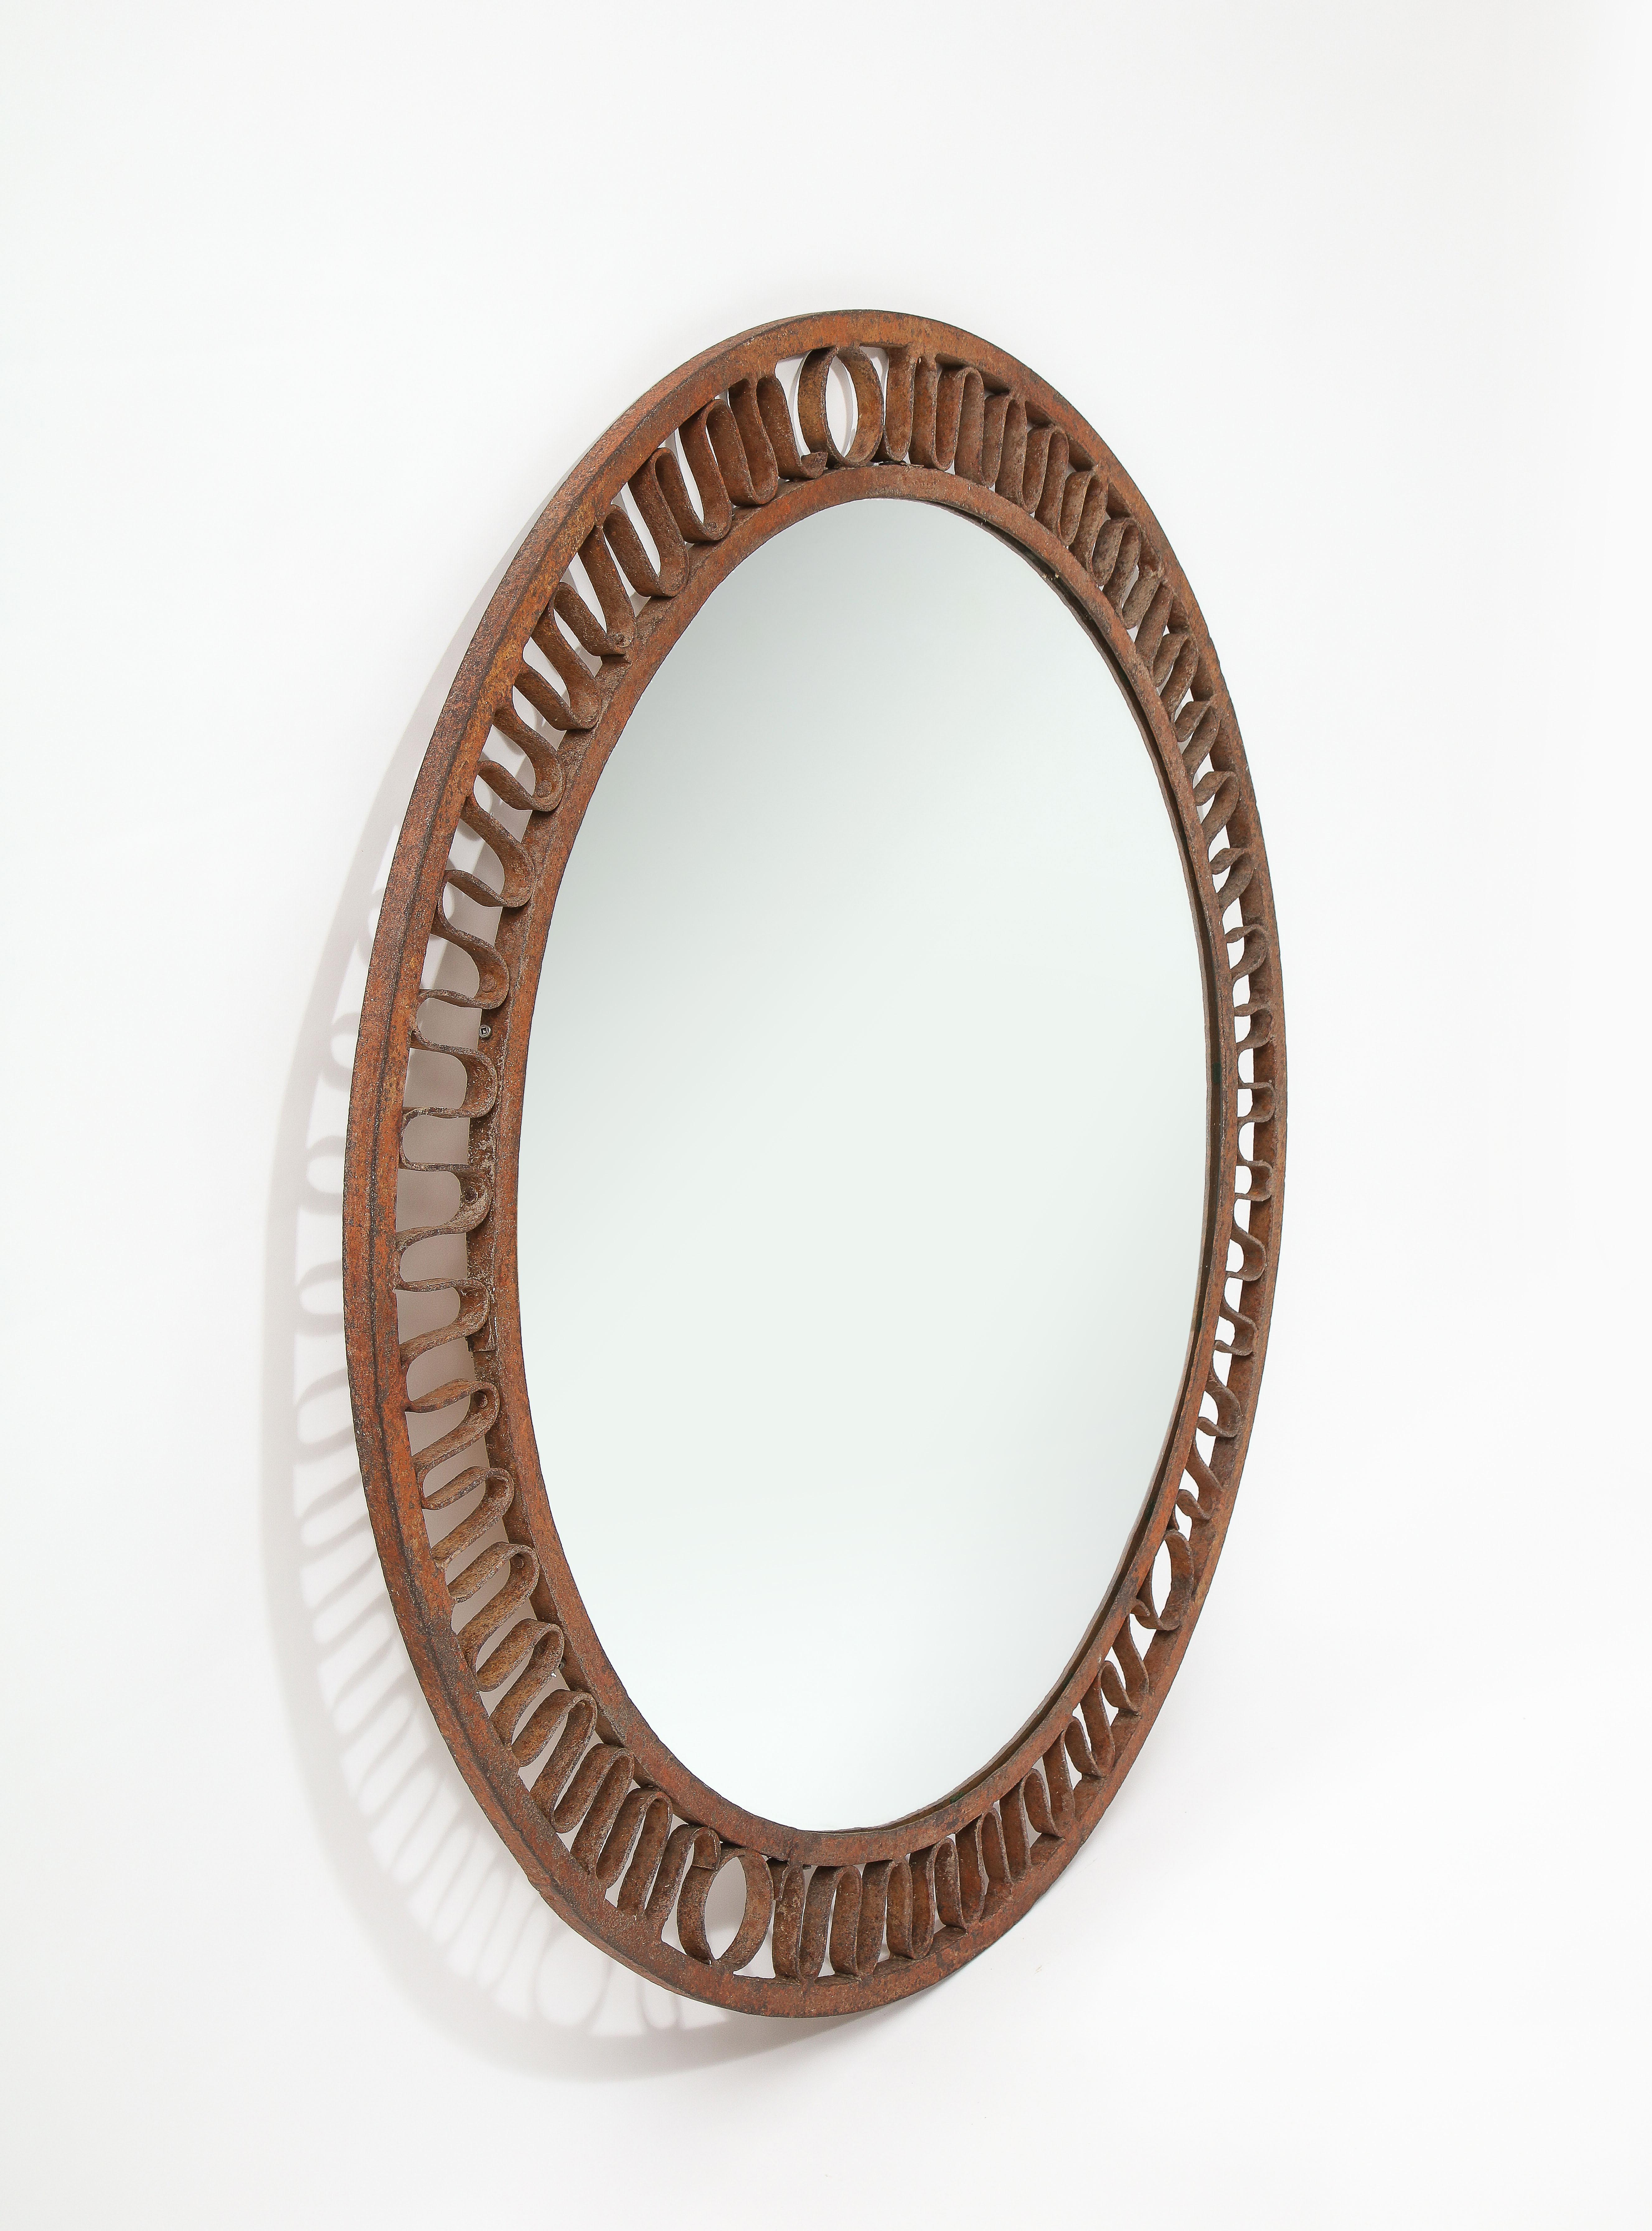 Large Wrought Iron Round Mirror, France 1950's For Sale 1